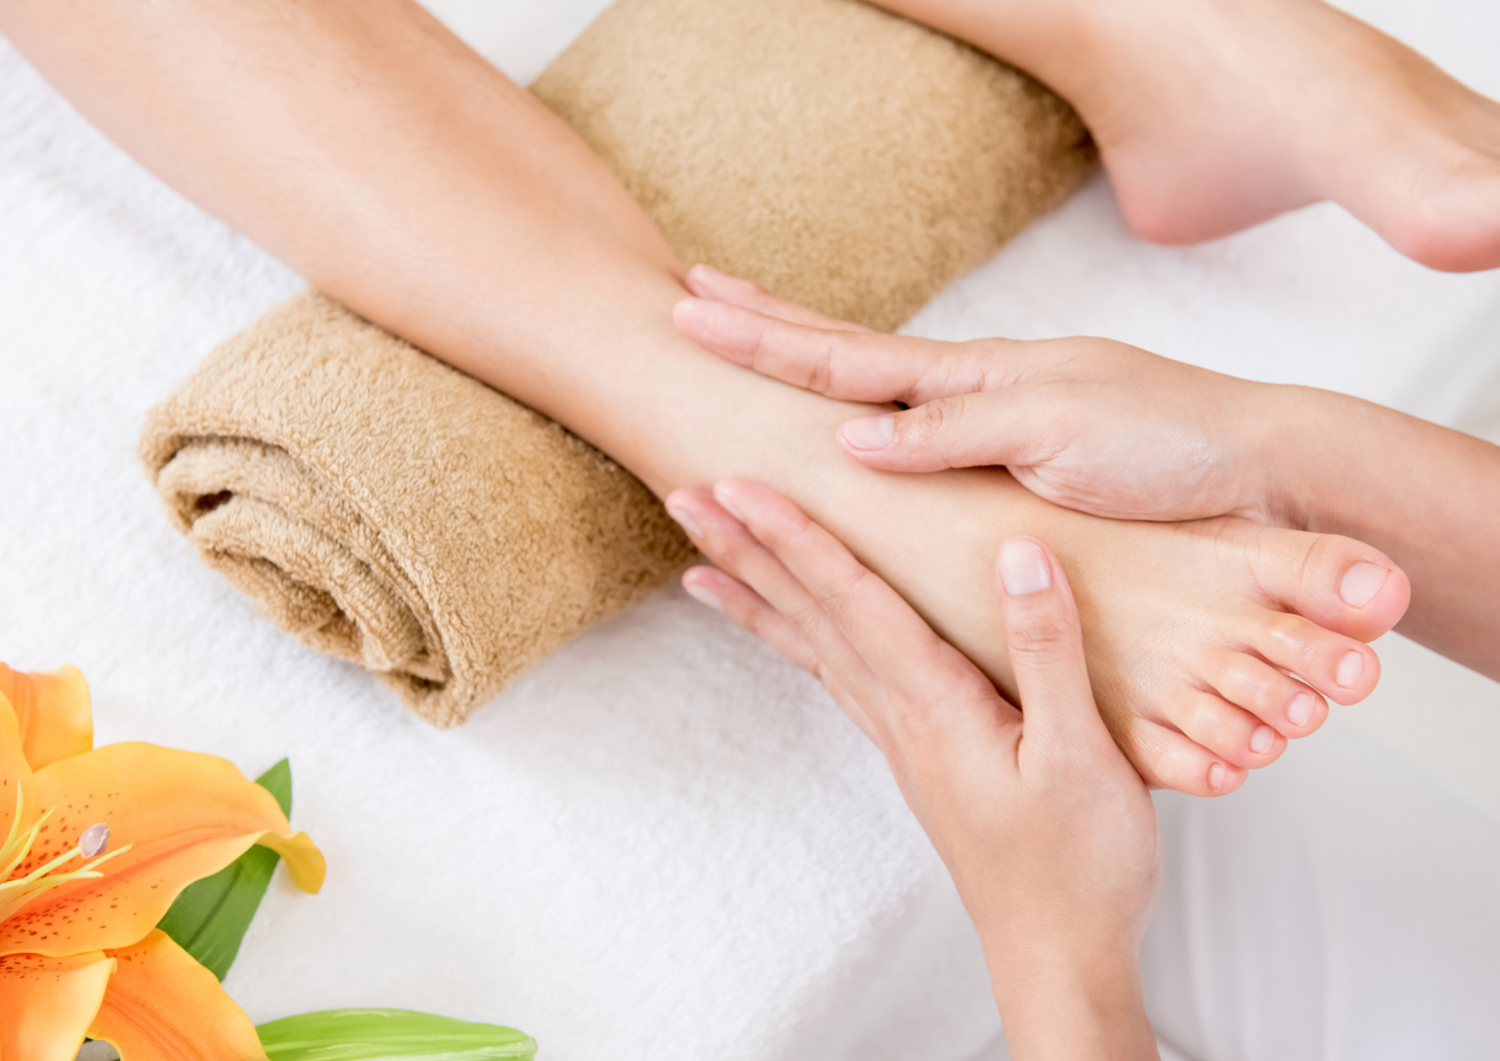 Deluxe Half Day Spa Retreat with 1 x 2 hour Tranquil Voyage or Total Massage Journey Treatment